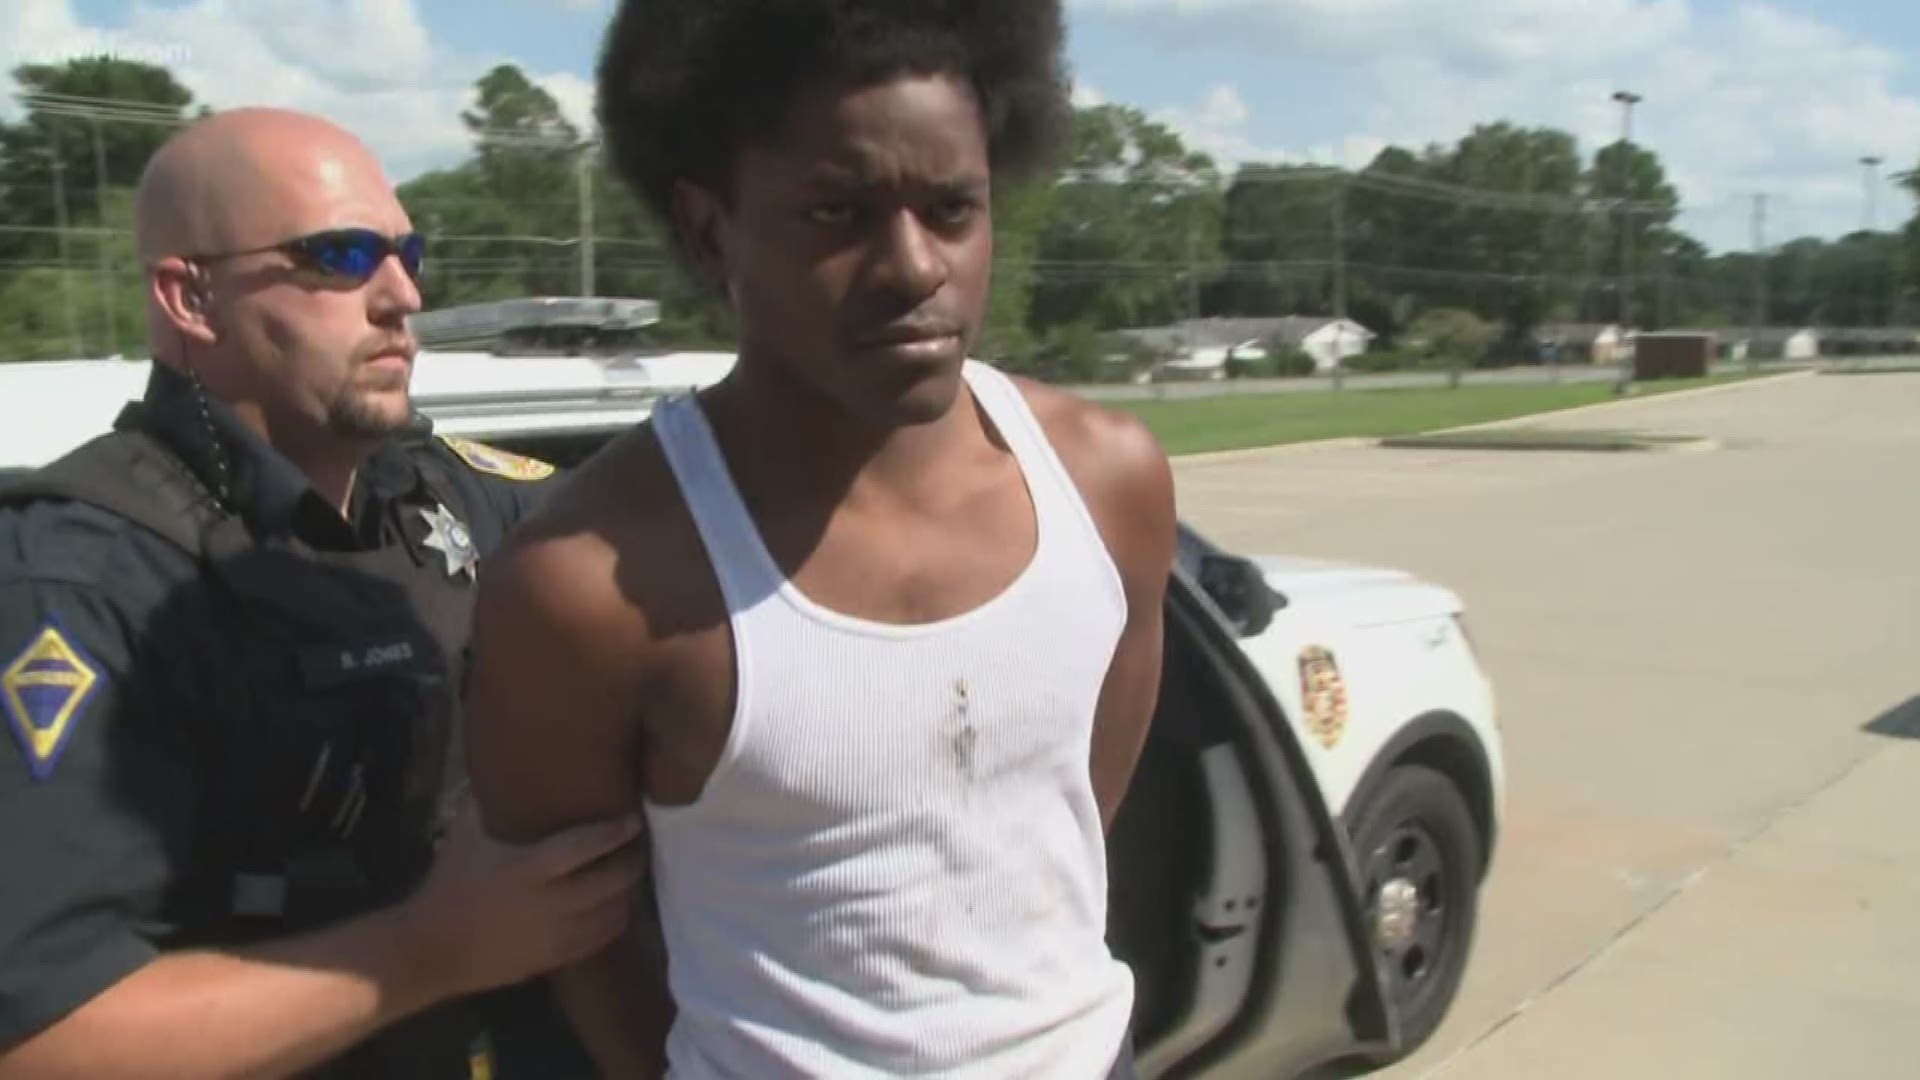 A man is now in Jacksonville Police custody after taking his daughter and running early this morning.